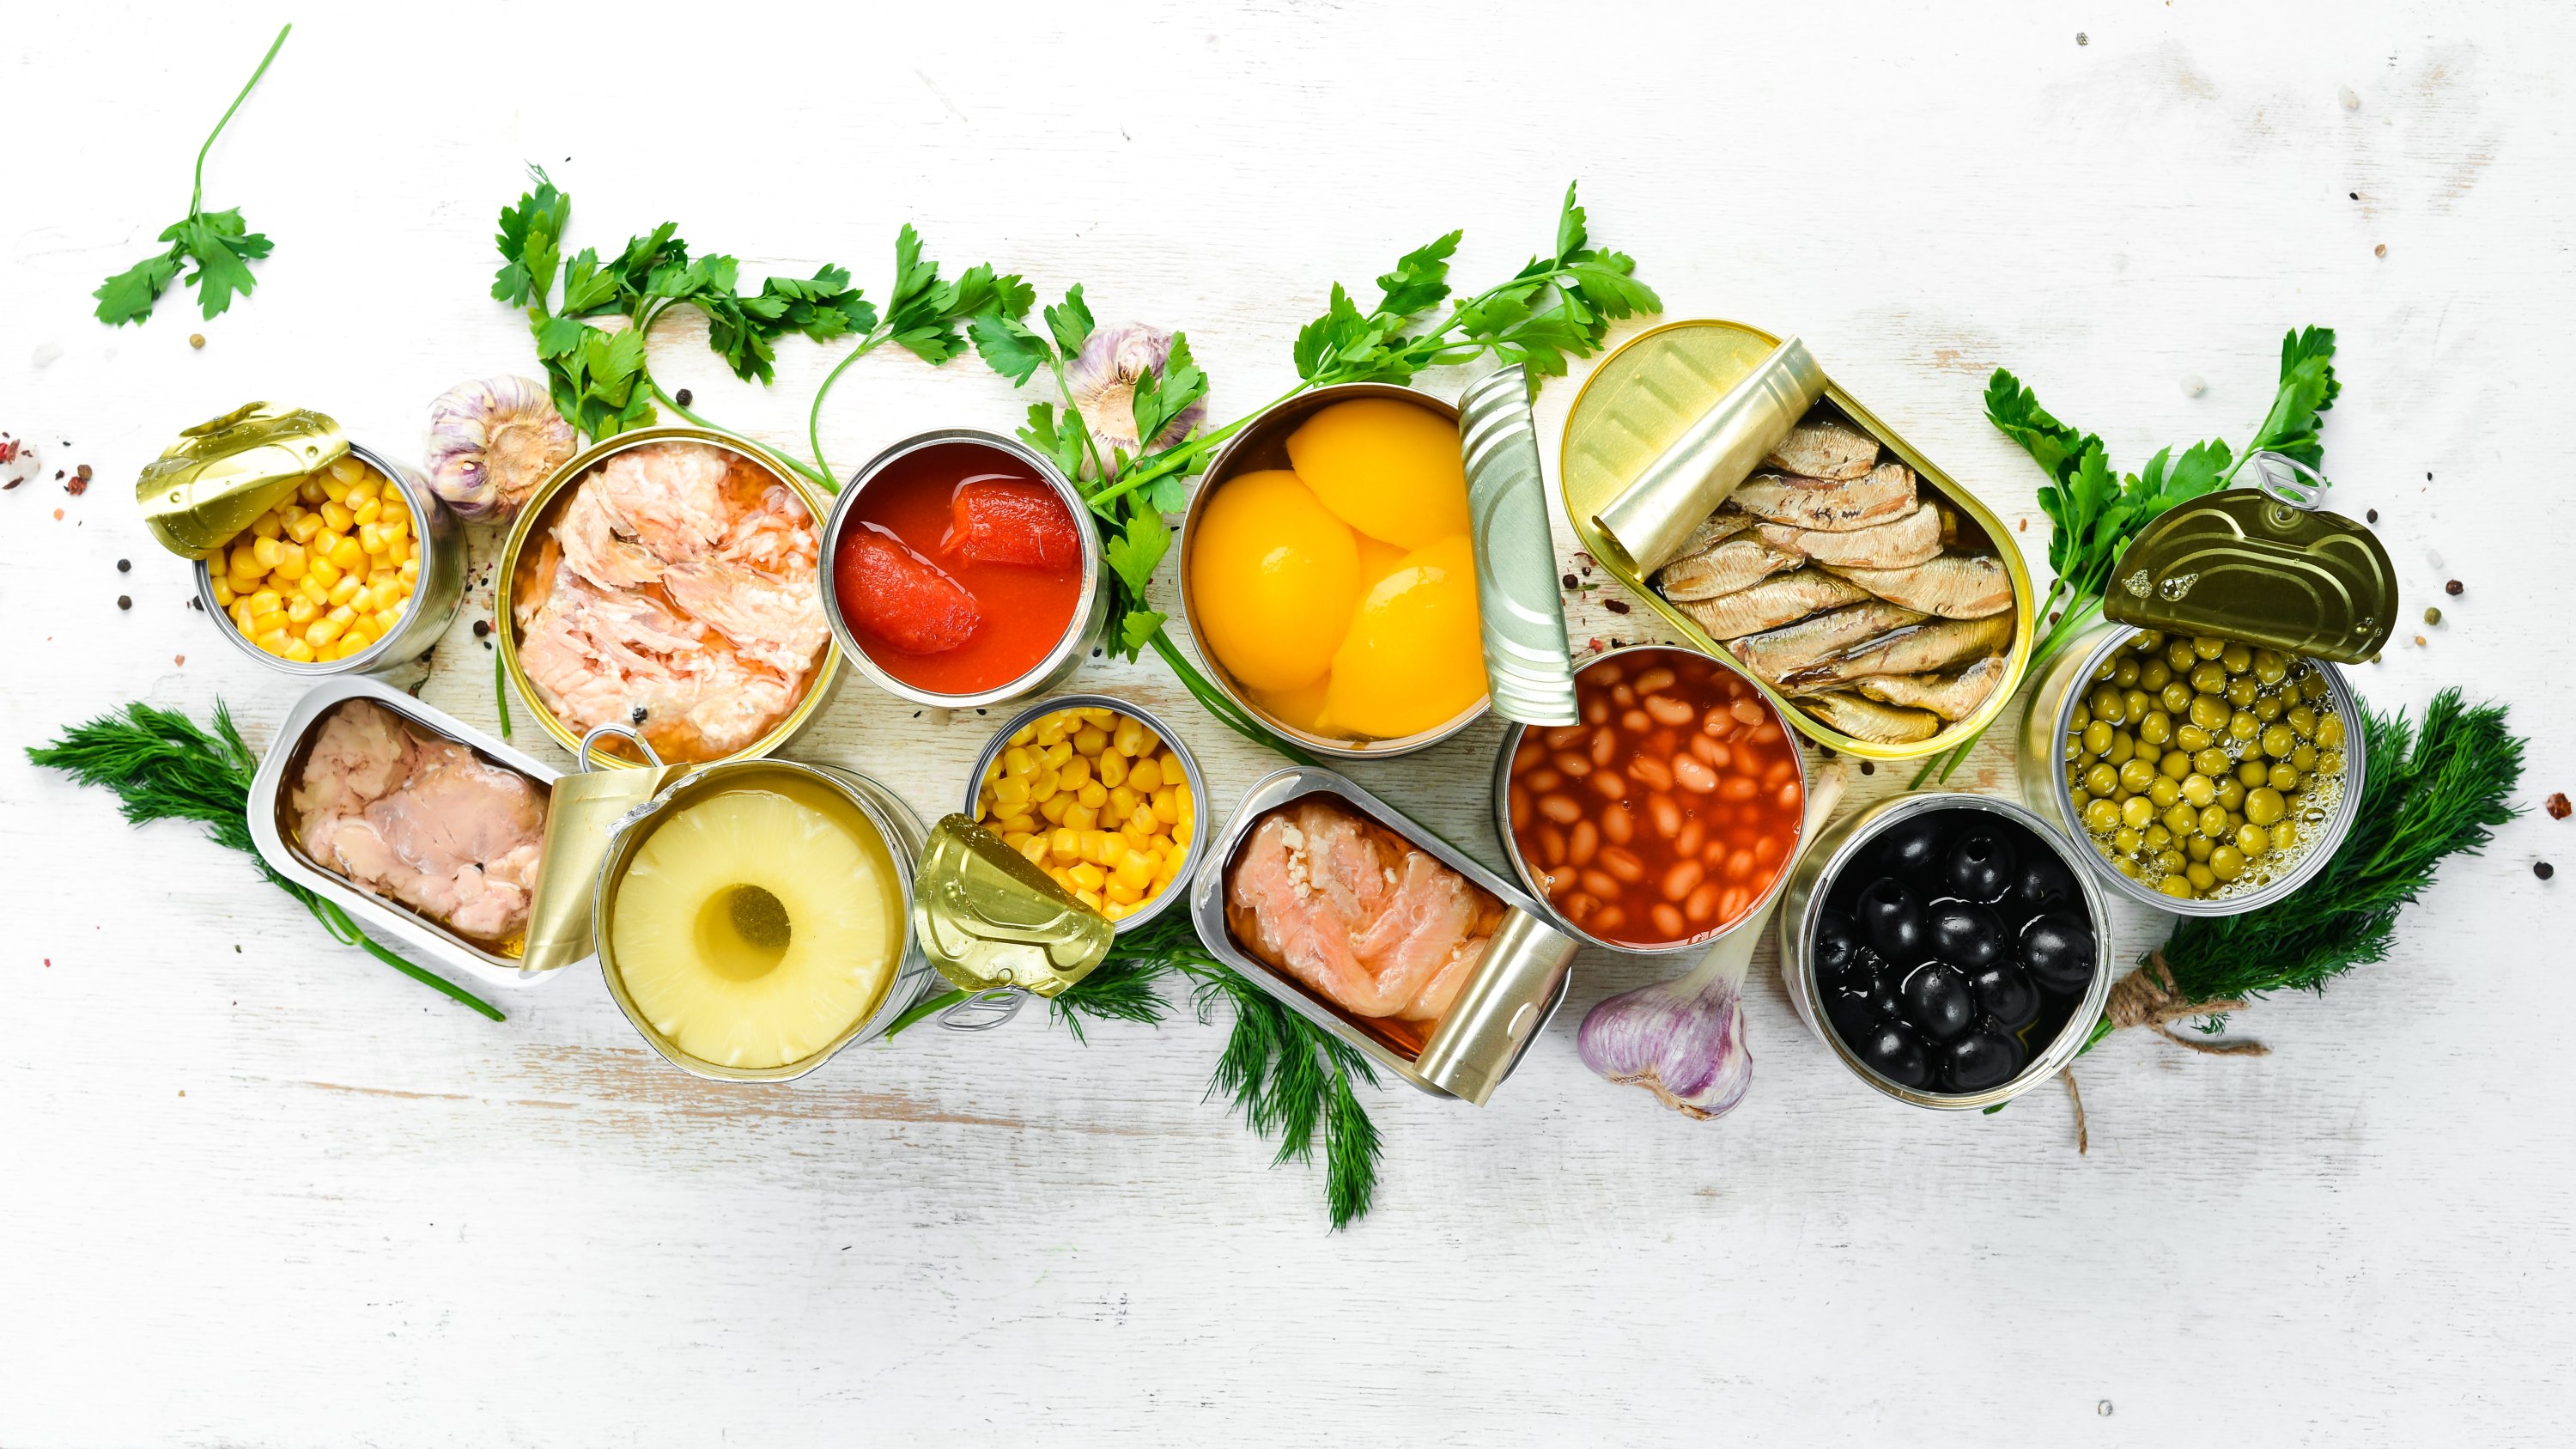 Instead of canned food at the market, you can prepare your own canned food at home. (Shutterstock) 